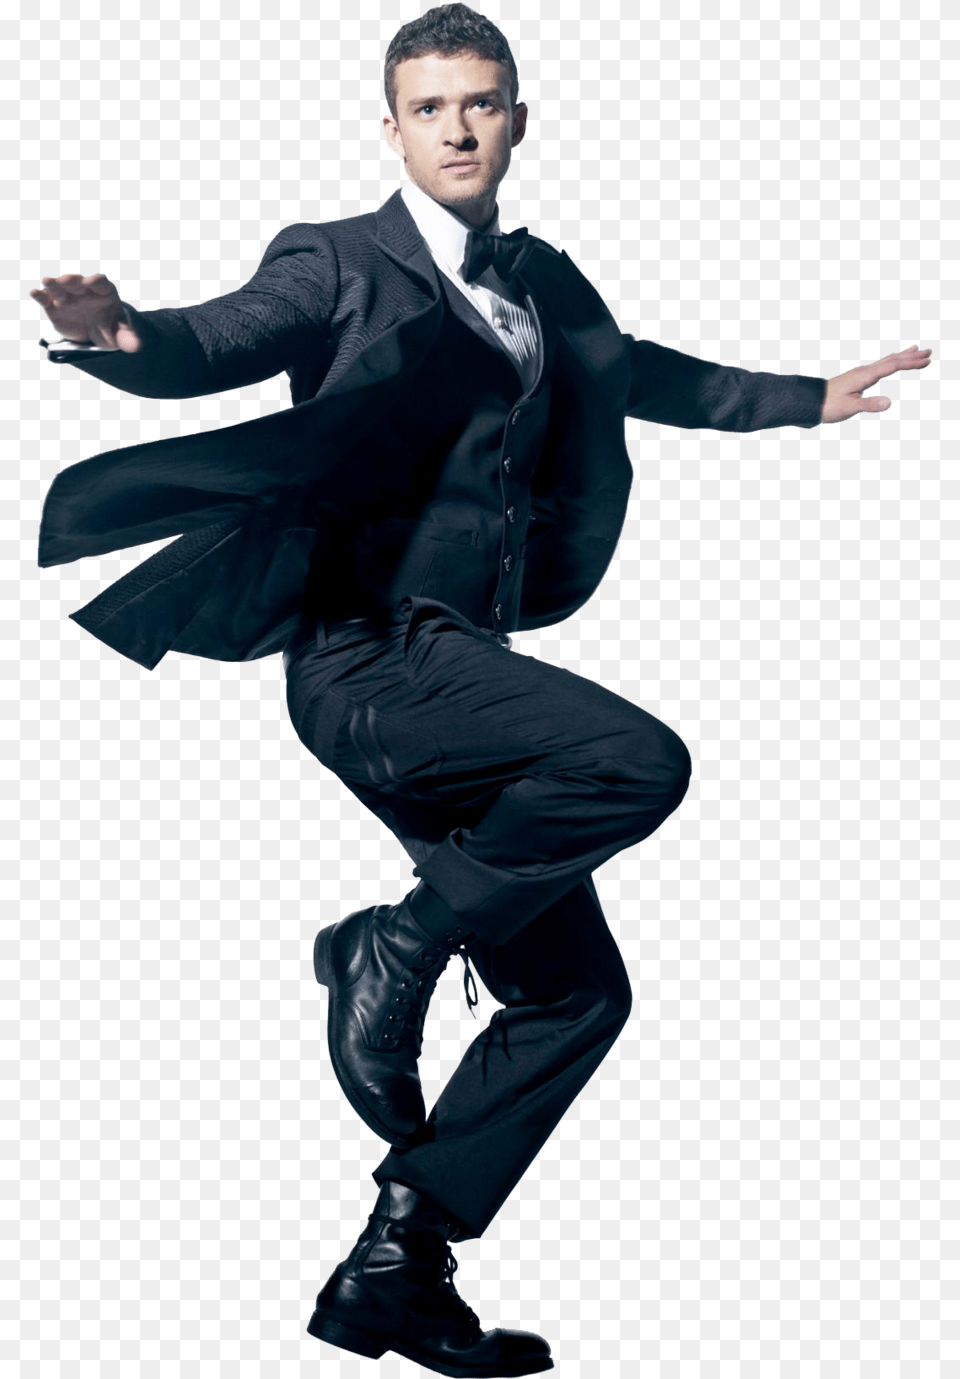 Justin Timberlake Image He Protec He Attac But Most Importantly He Bac, Suit, Clothing, Formal Wear, Person Free Transparent Png